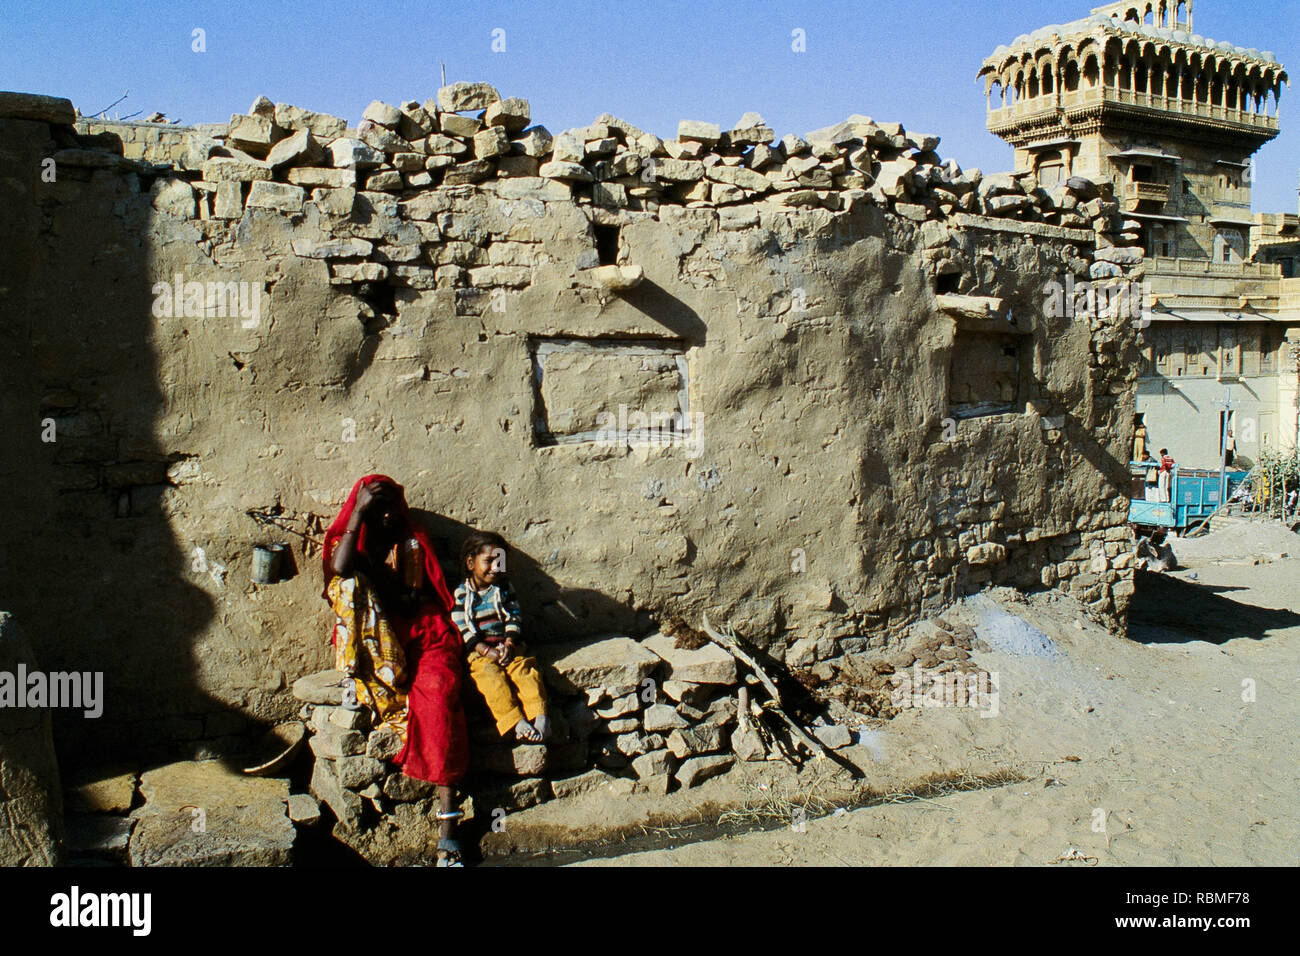 Mother and daughter sitting together, Jaisalmer, Rajasthan, India, Asia Stock Photo